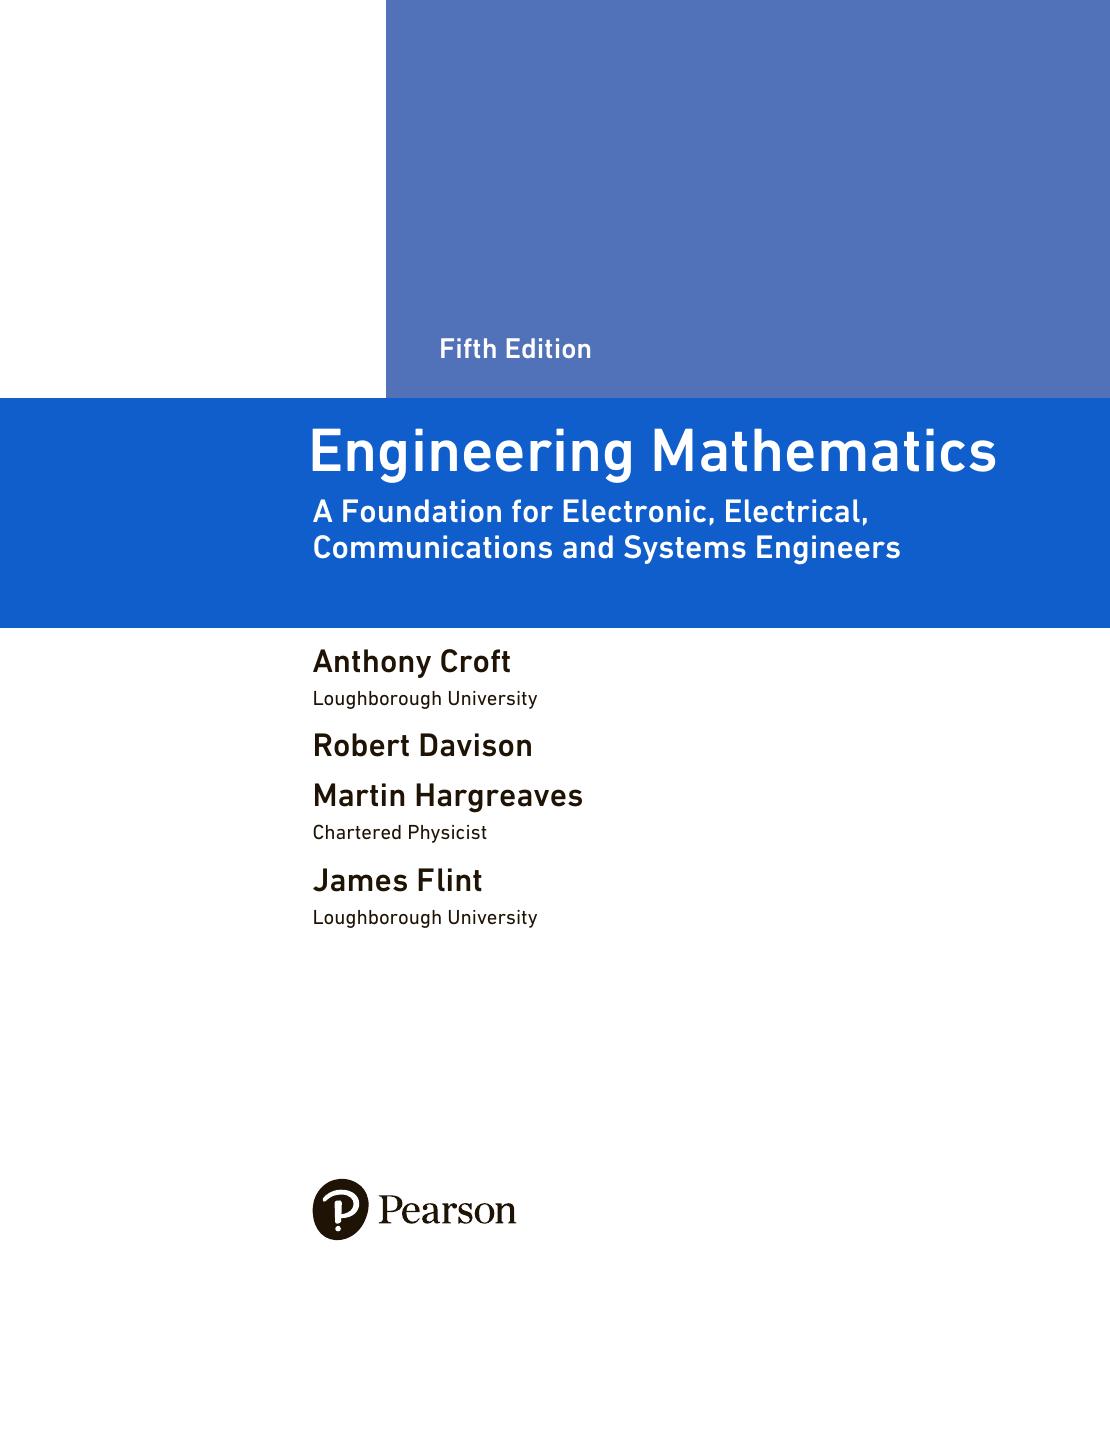 Engineering Mathematics. A Foundation for Electronic, Electrical, Communications and Systems Engineers 2017